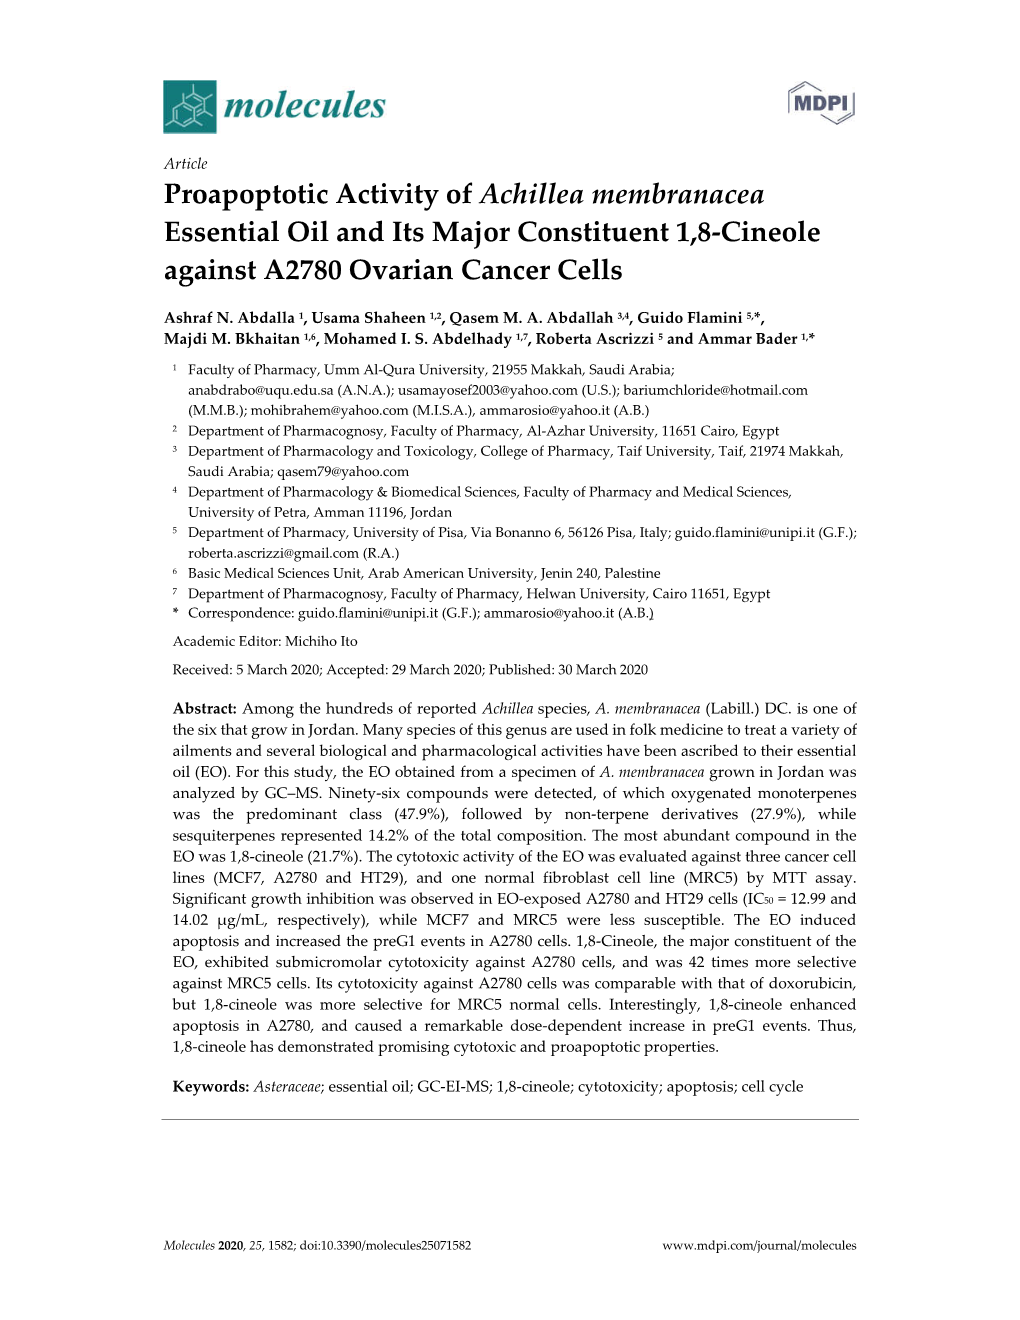 Proapoptotic Activity of Achillea Membranacea Essential Oil and Its Major Constituent 1,8-Cineole Against A2780 Ovarian Cancer Cells